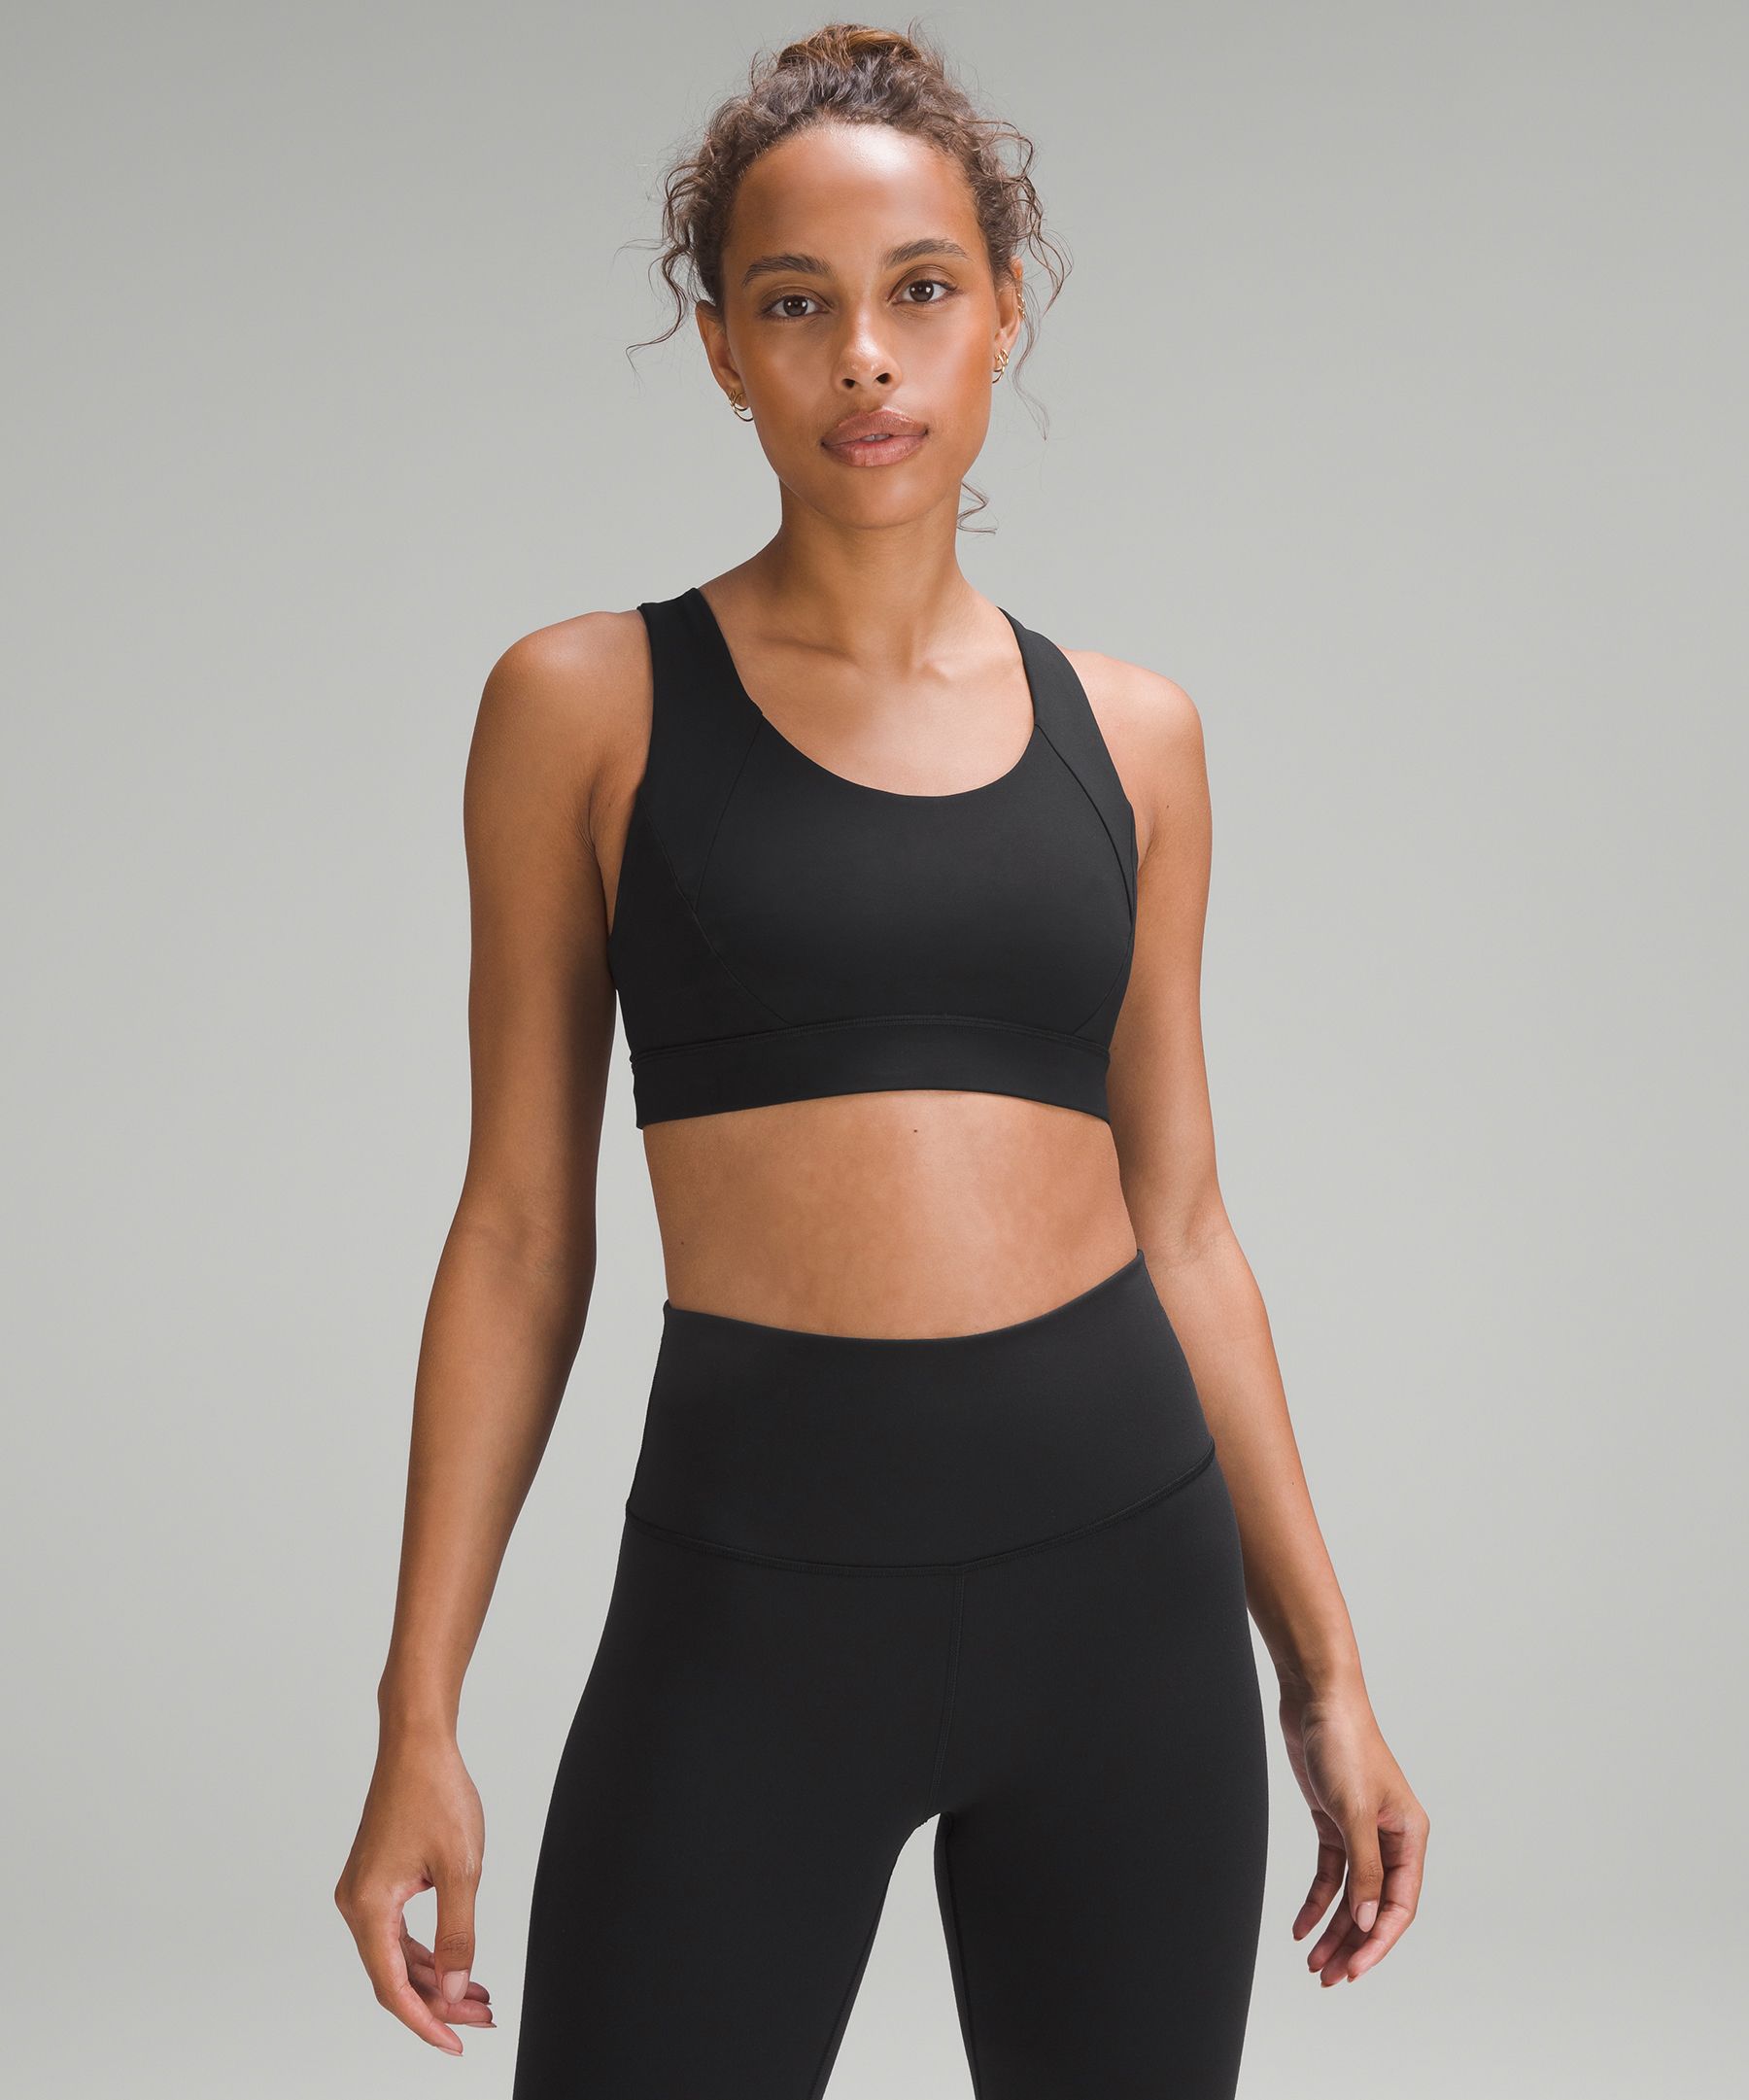 Lululemon Free To Be Elevated Bra Light Support, Dd/ddd(e) Cup In Black